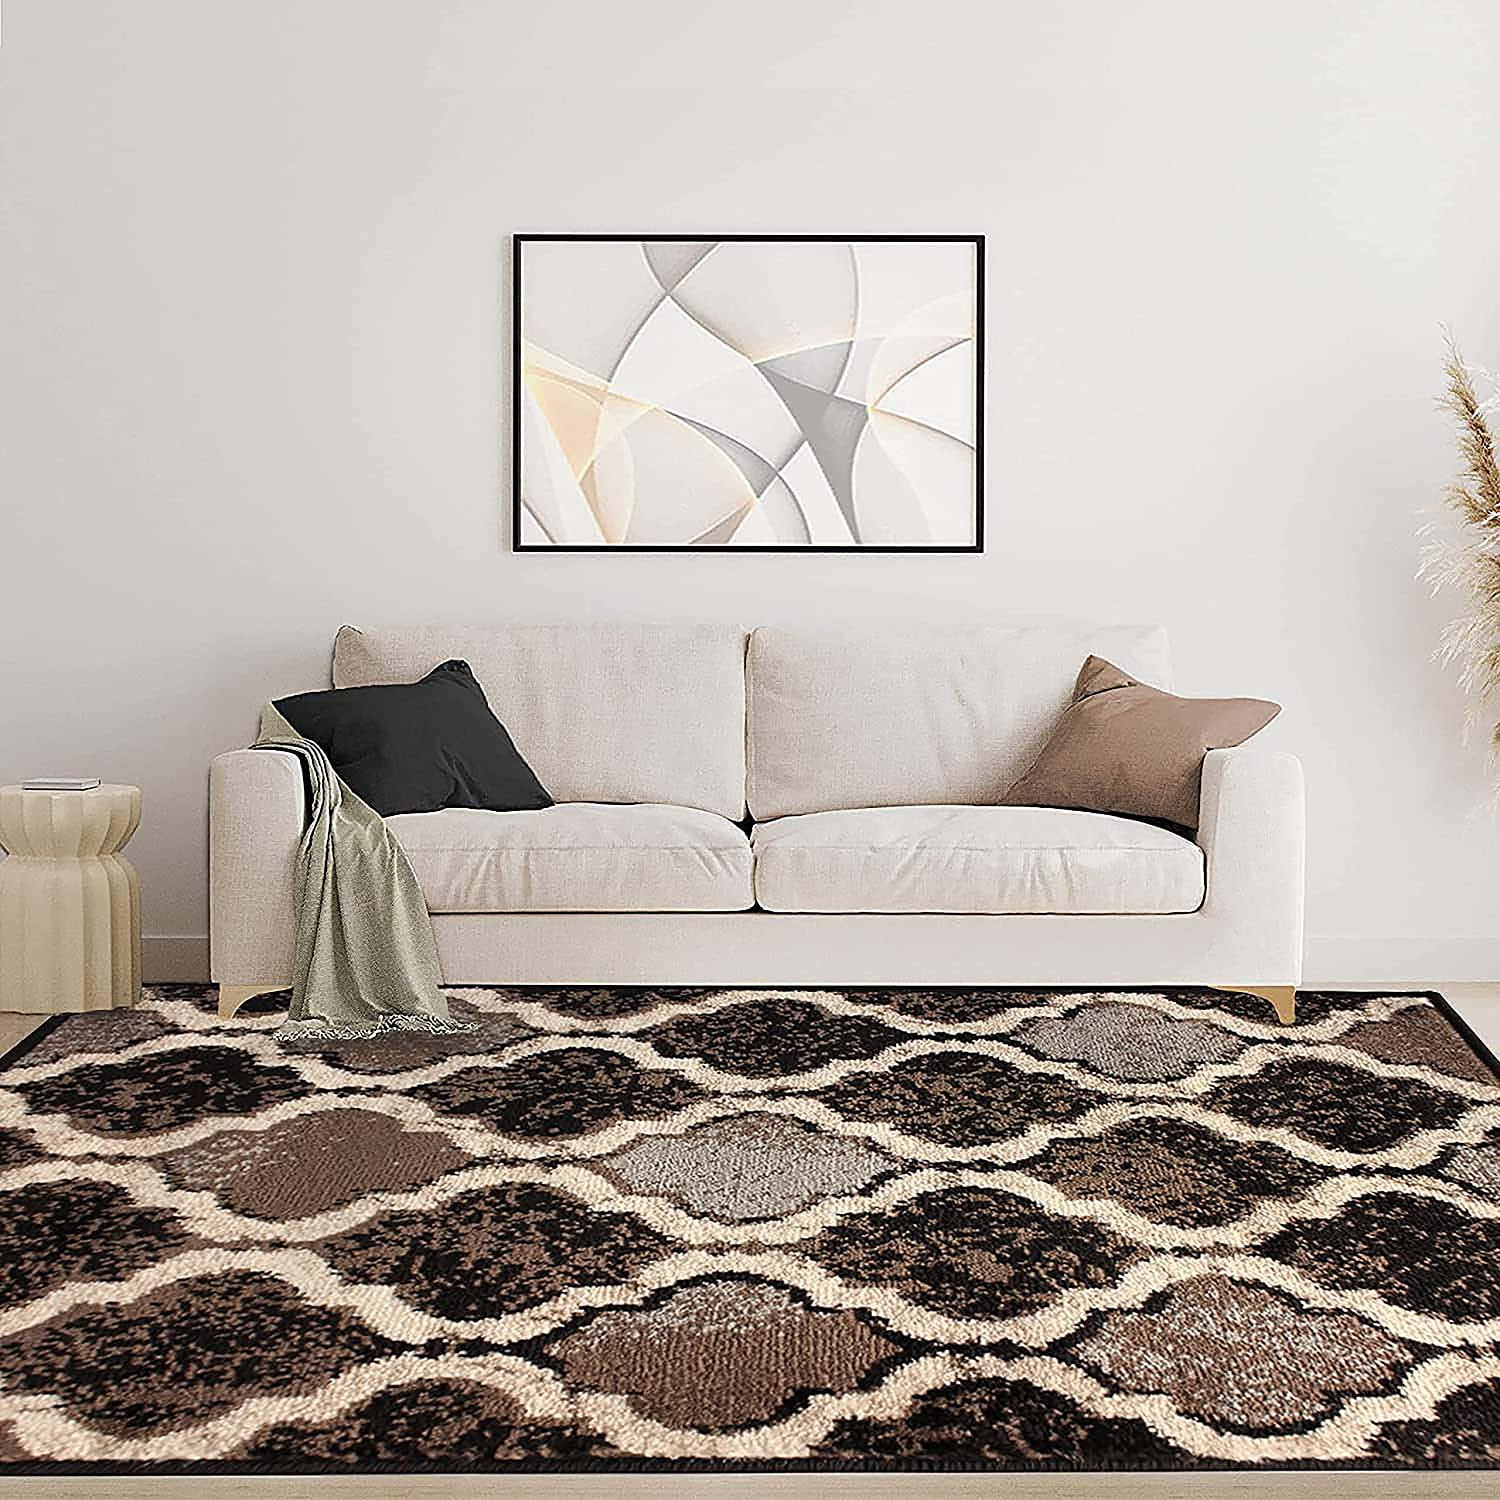 42 Unique Rug Ideas For A Small Living Room